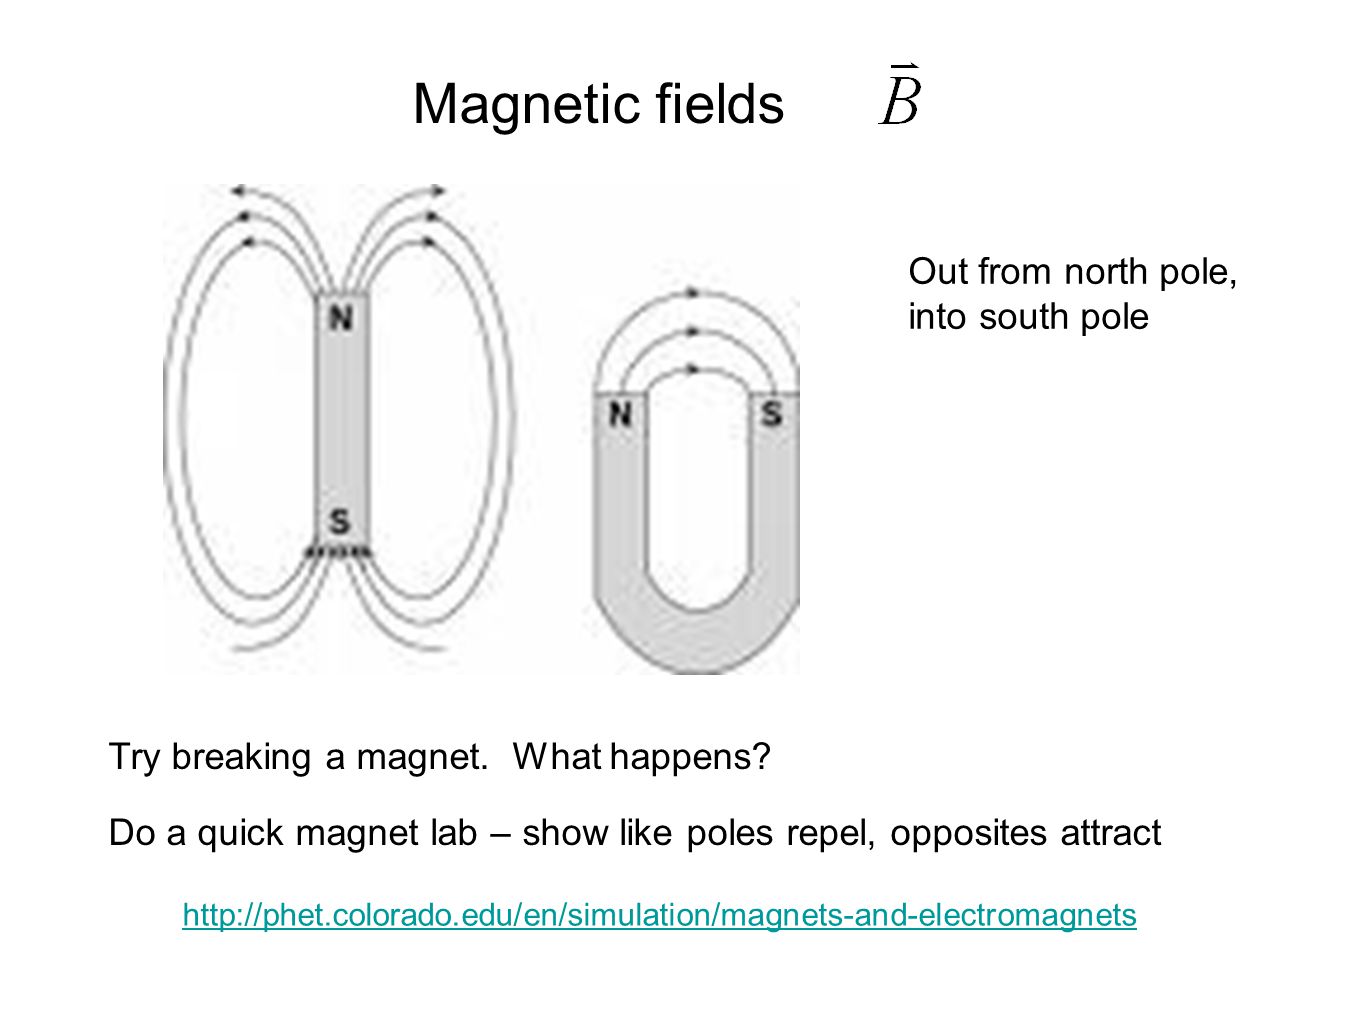 phet colorado magnets and electromagnets